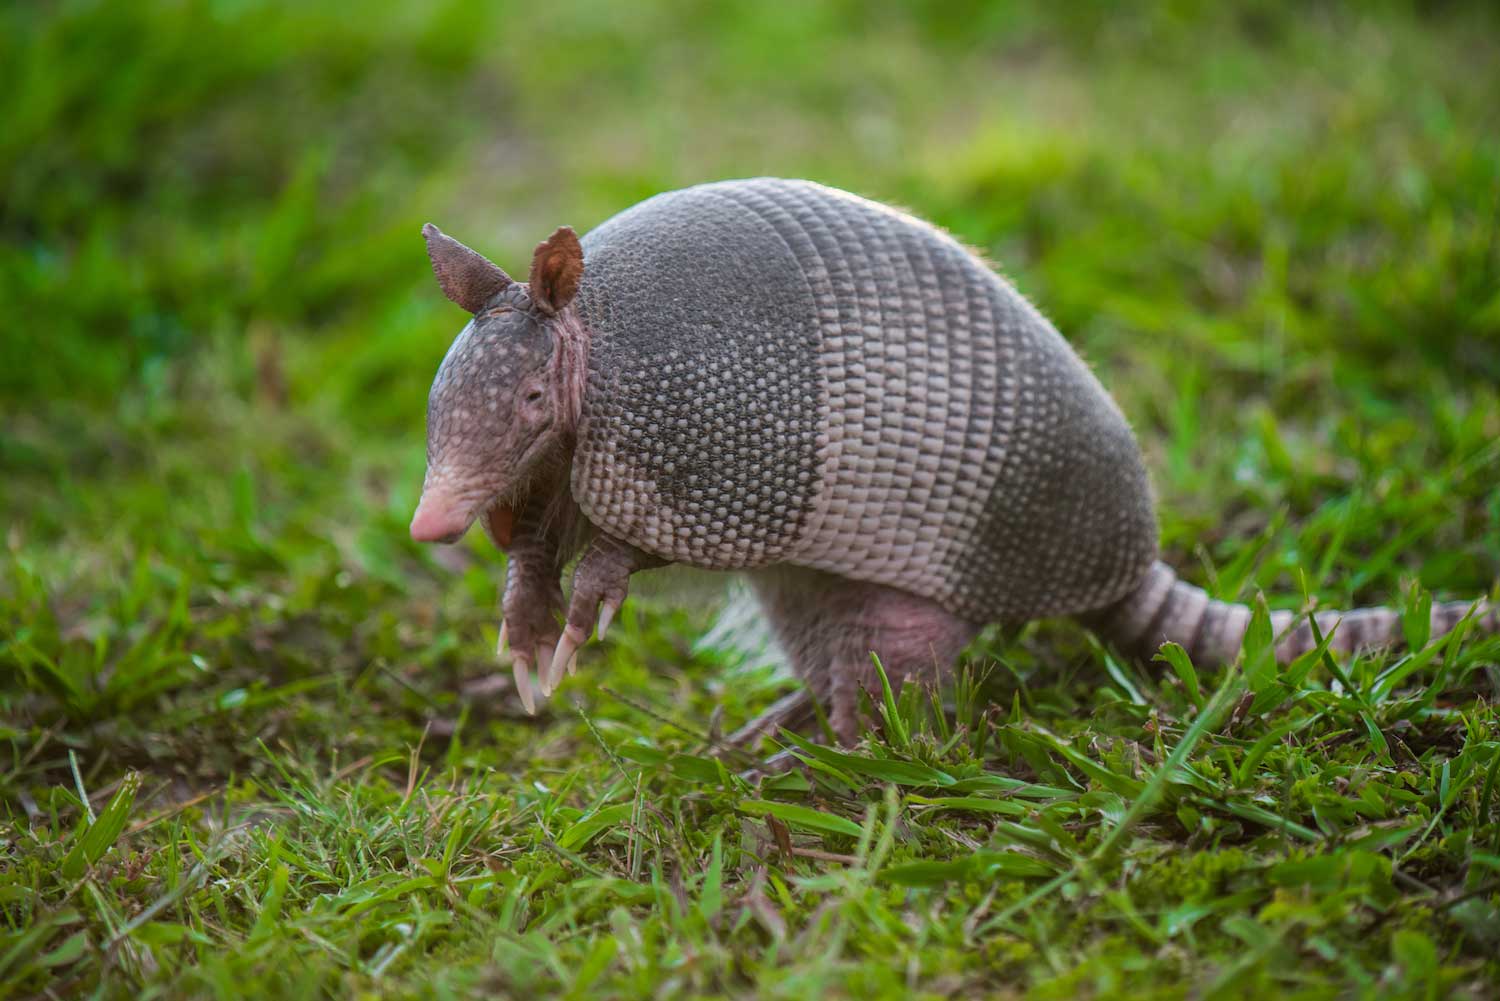 An armadillo in the grass.